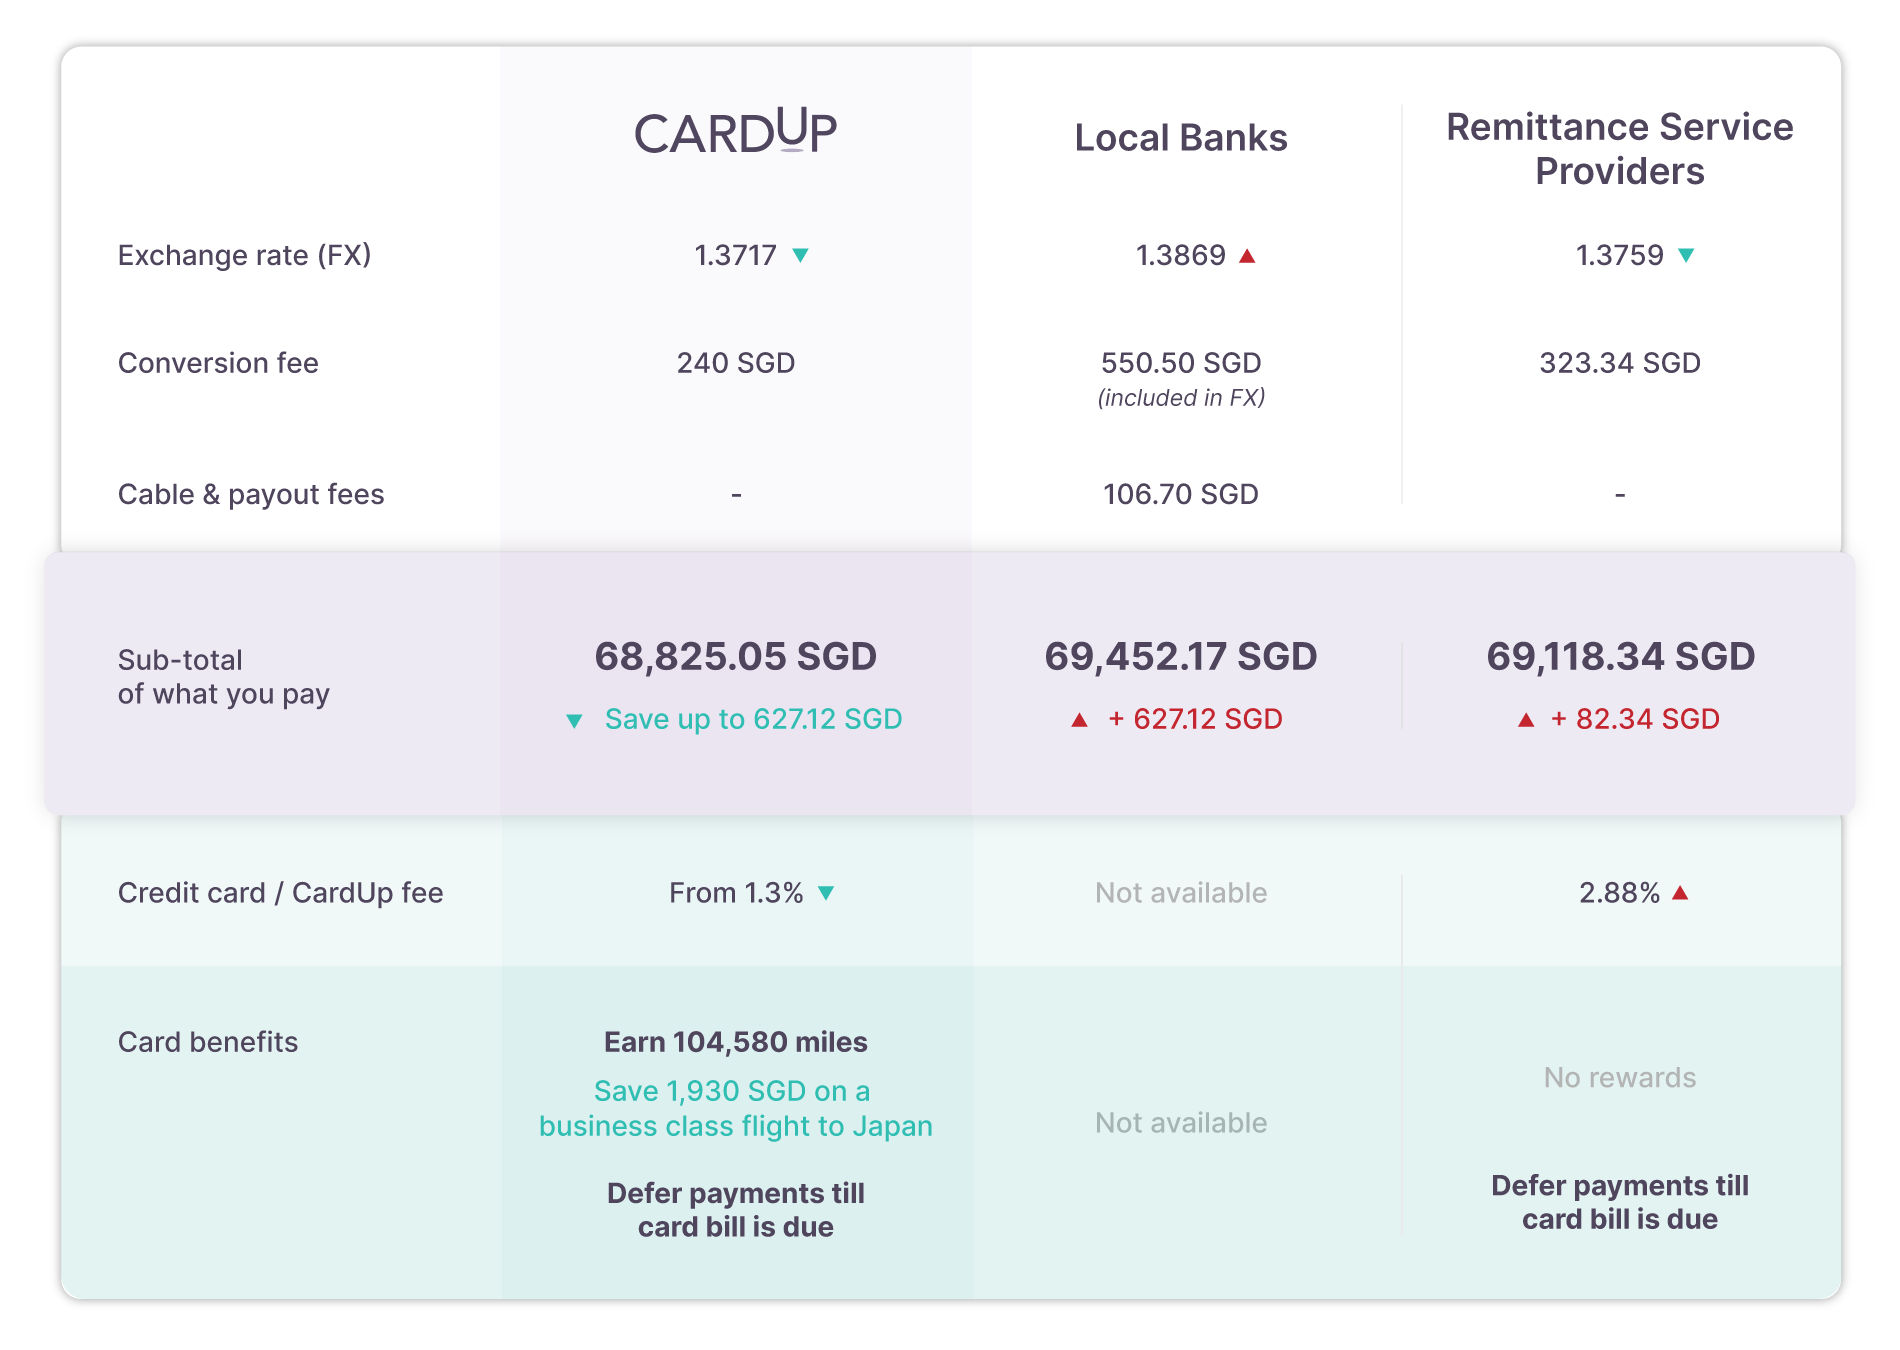 Compare CardUp prices against other banks or remittance service providers for international payments